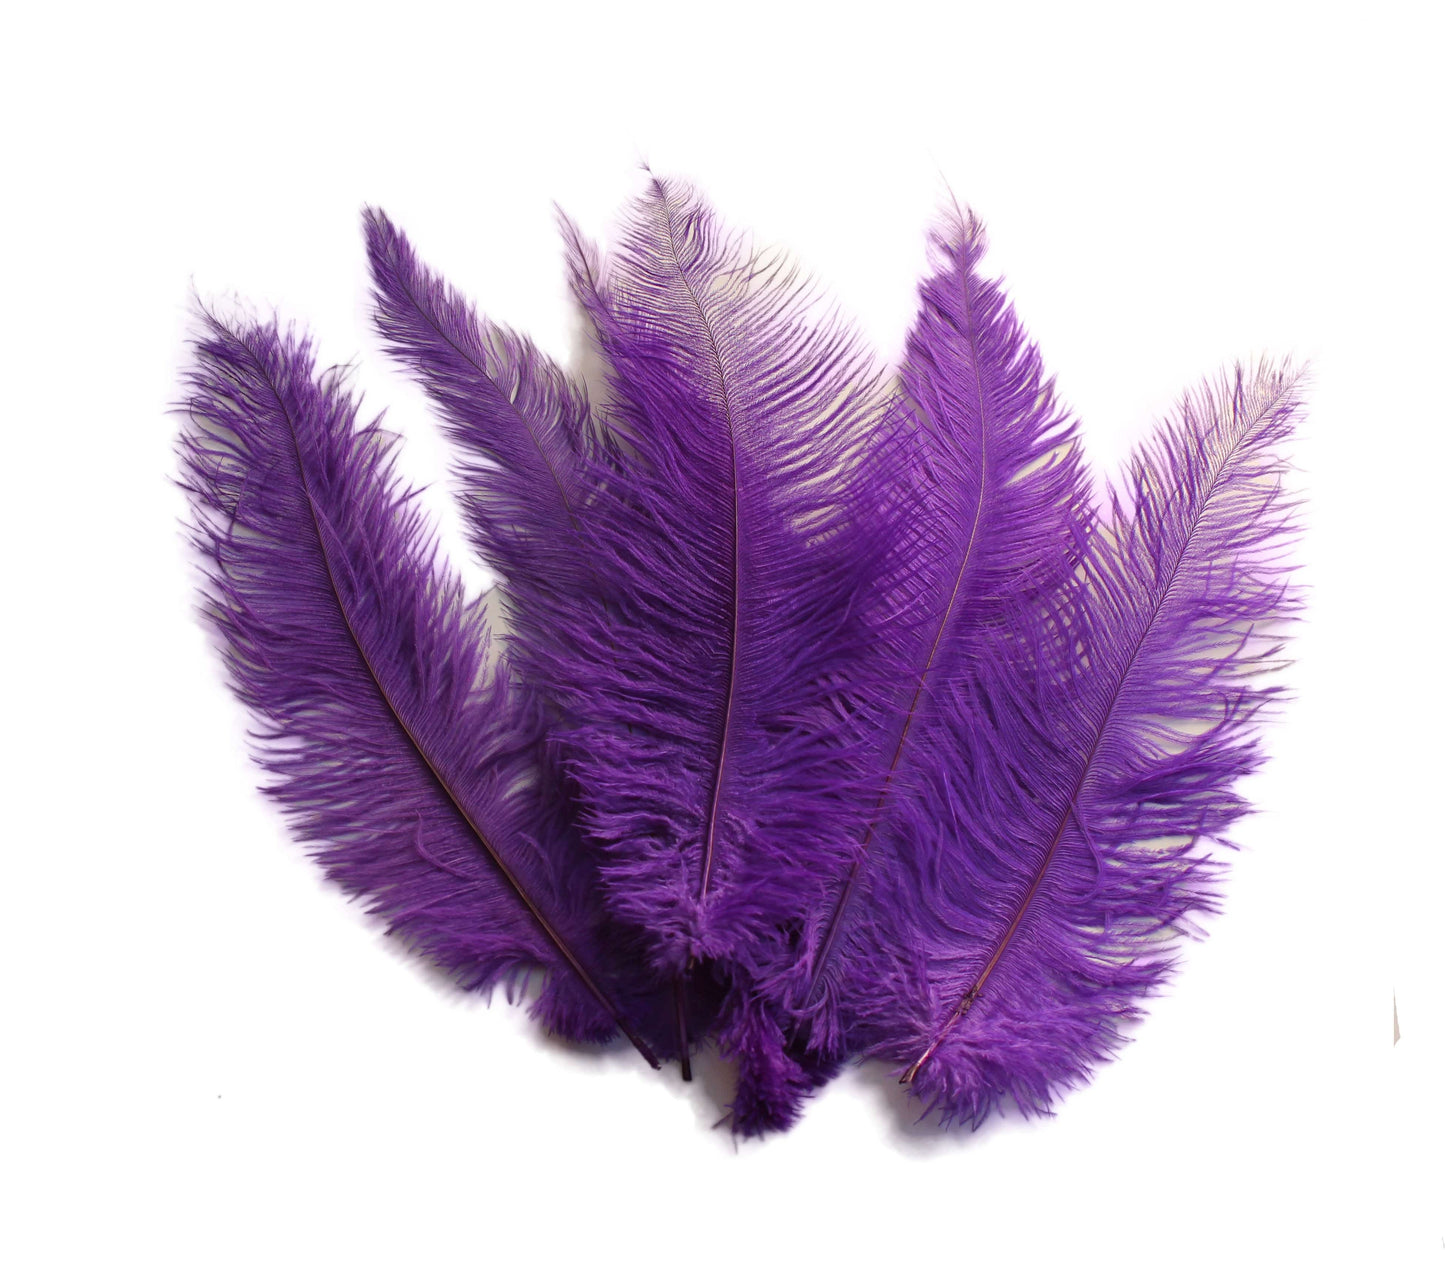 Ostrich Feather Spad Plumes 13-16" (Purple) - Buy Ostrich Feathers